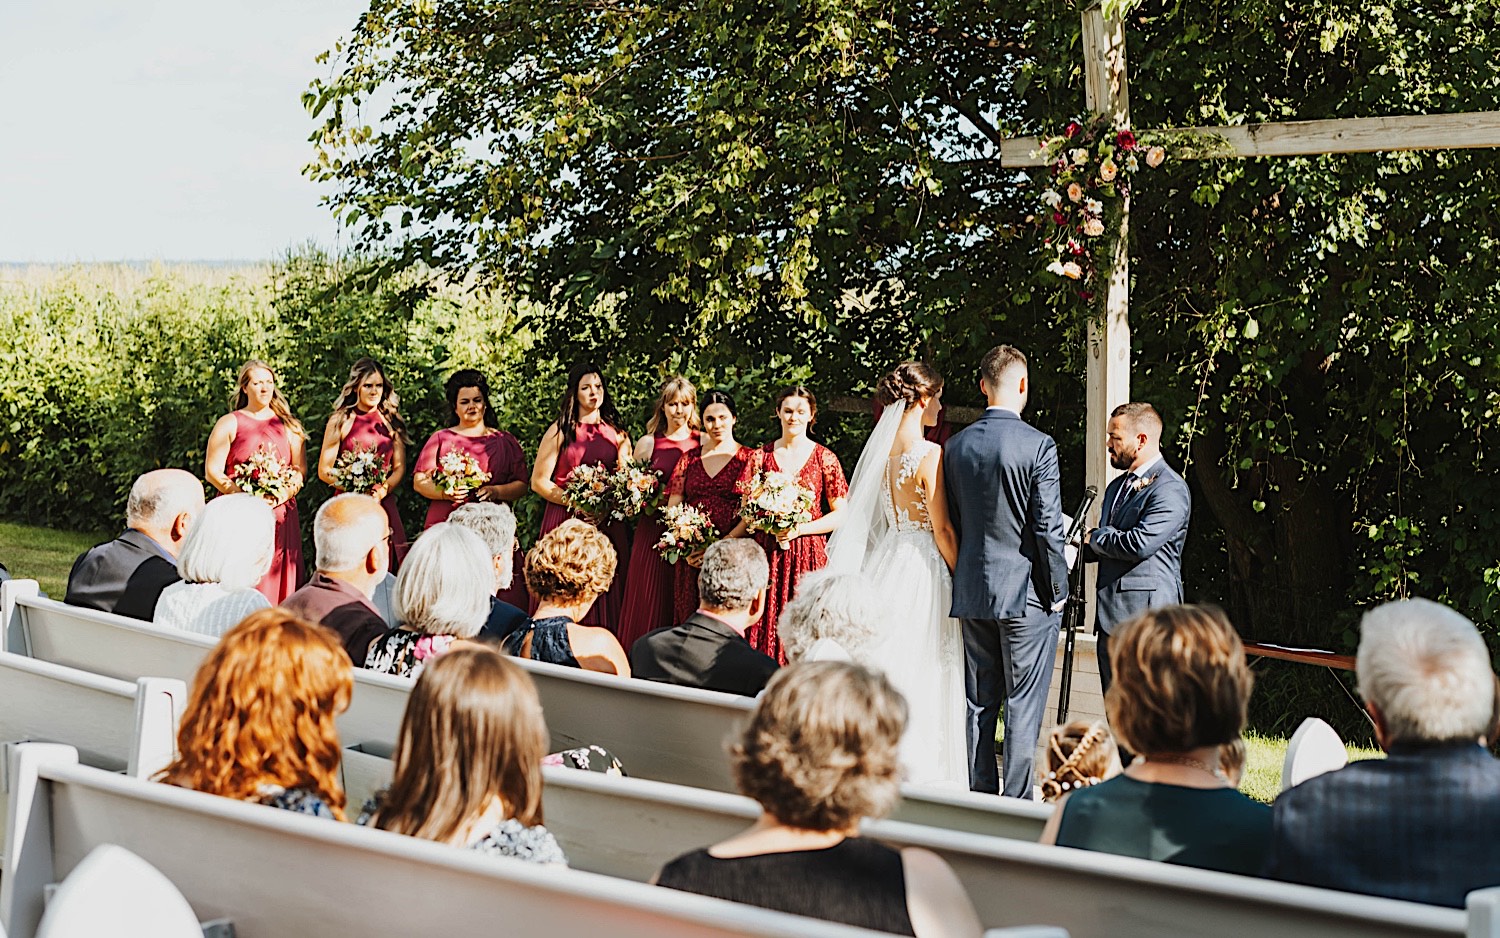 A bride and groom stand side by side during their outdoor wedding ceremony at Legacy Hill Farm while guests watch